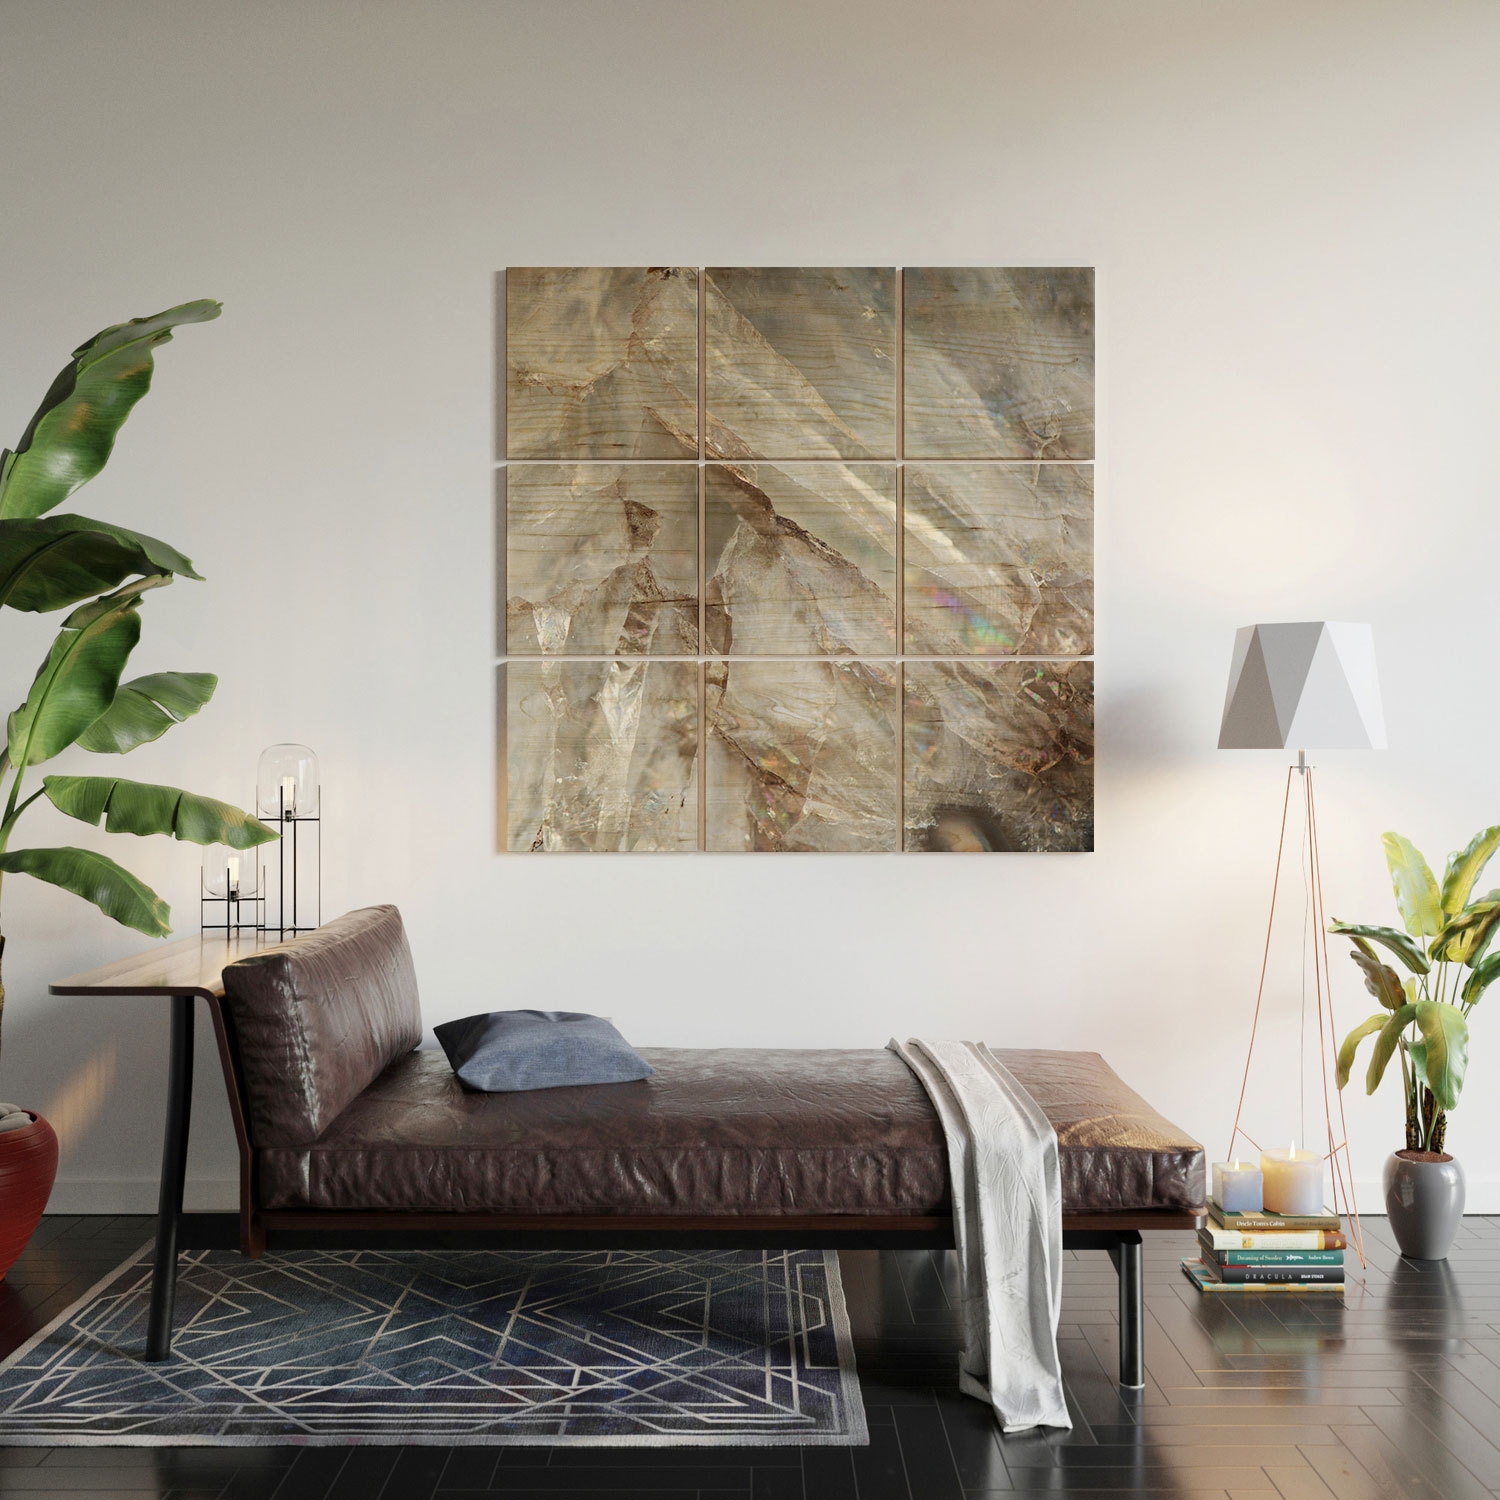 Crystalize by Bree Madden - Wood Wall Mural3' X 3' (Nine 12" Wood Squares) - Image 1